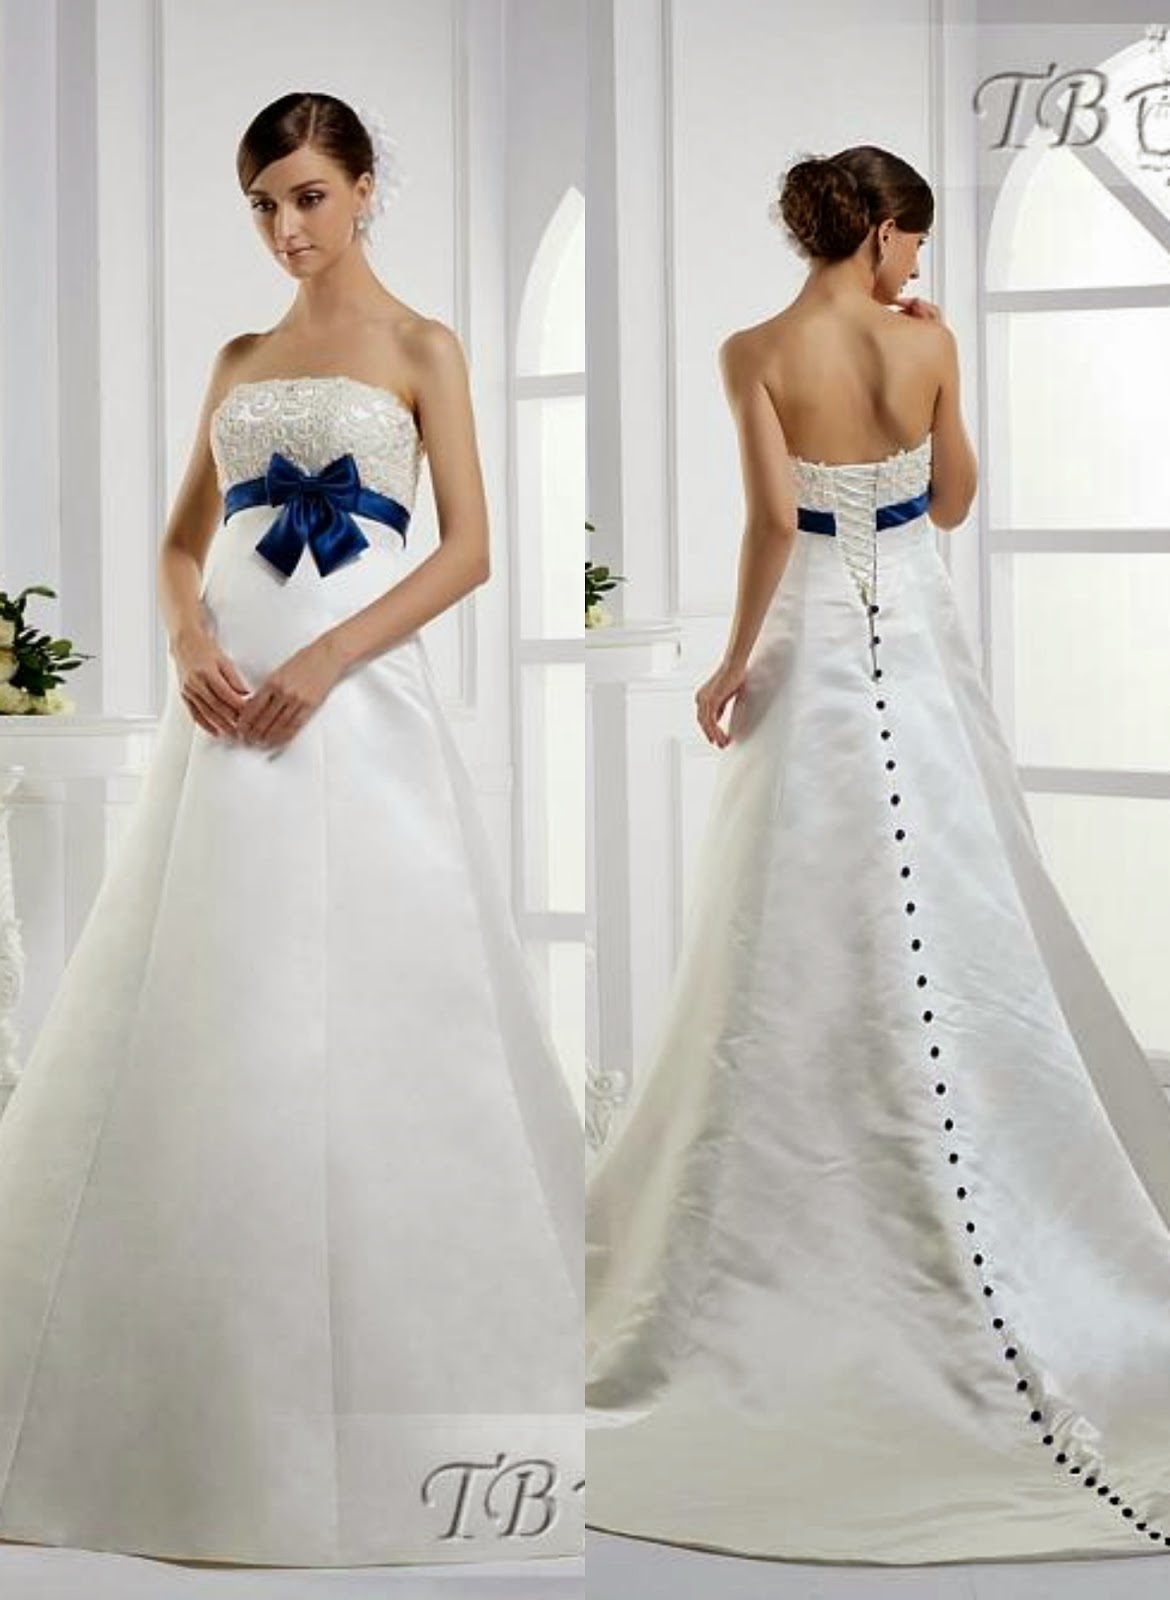  Wedding Dress 5 Months Pregnant in the world Check it out now 